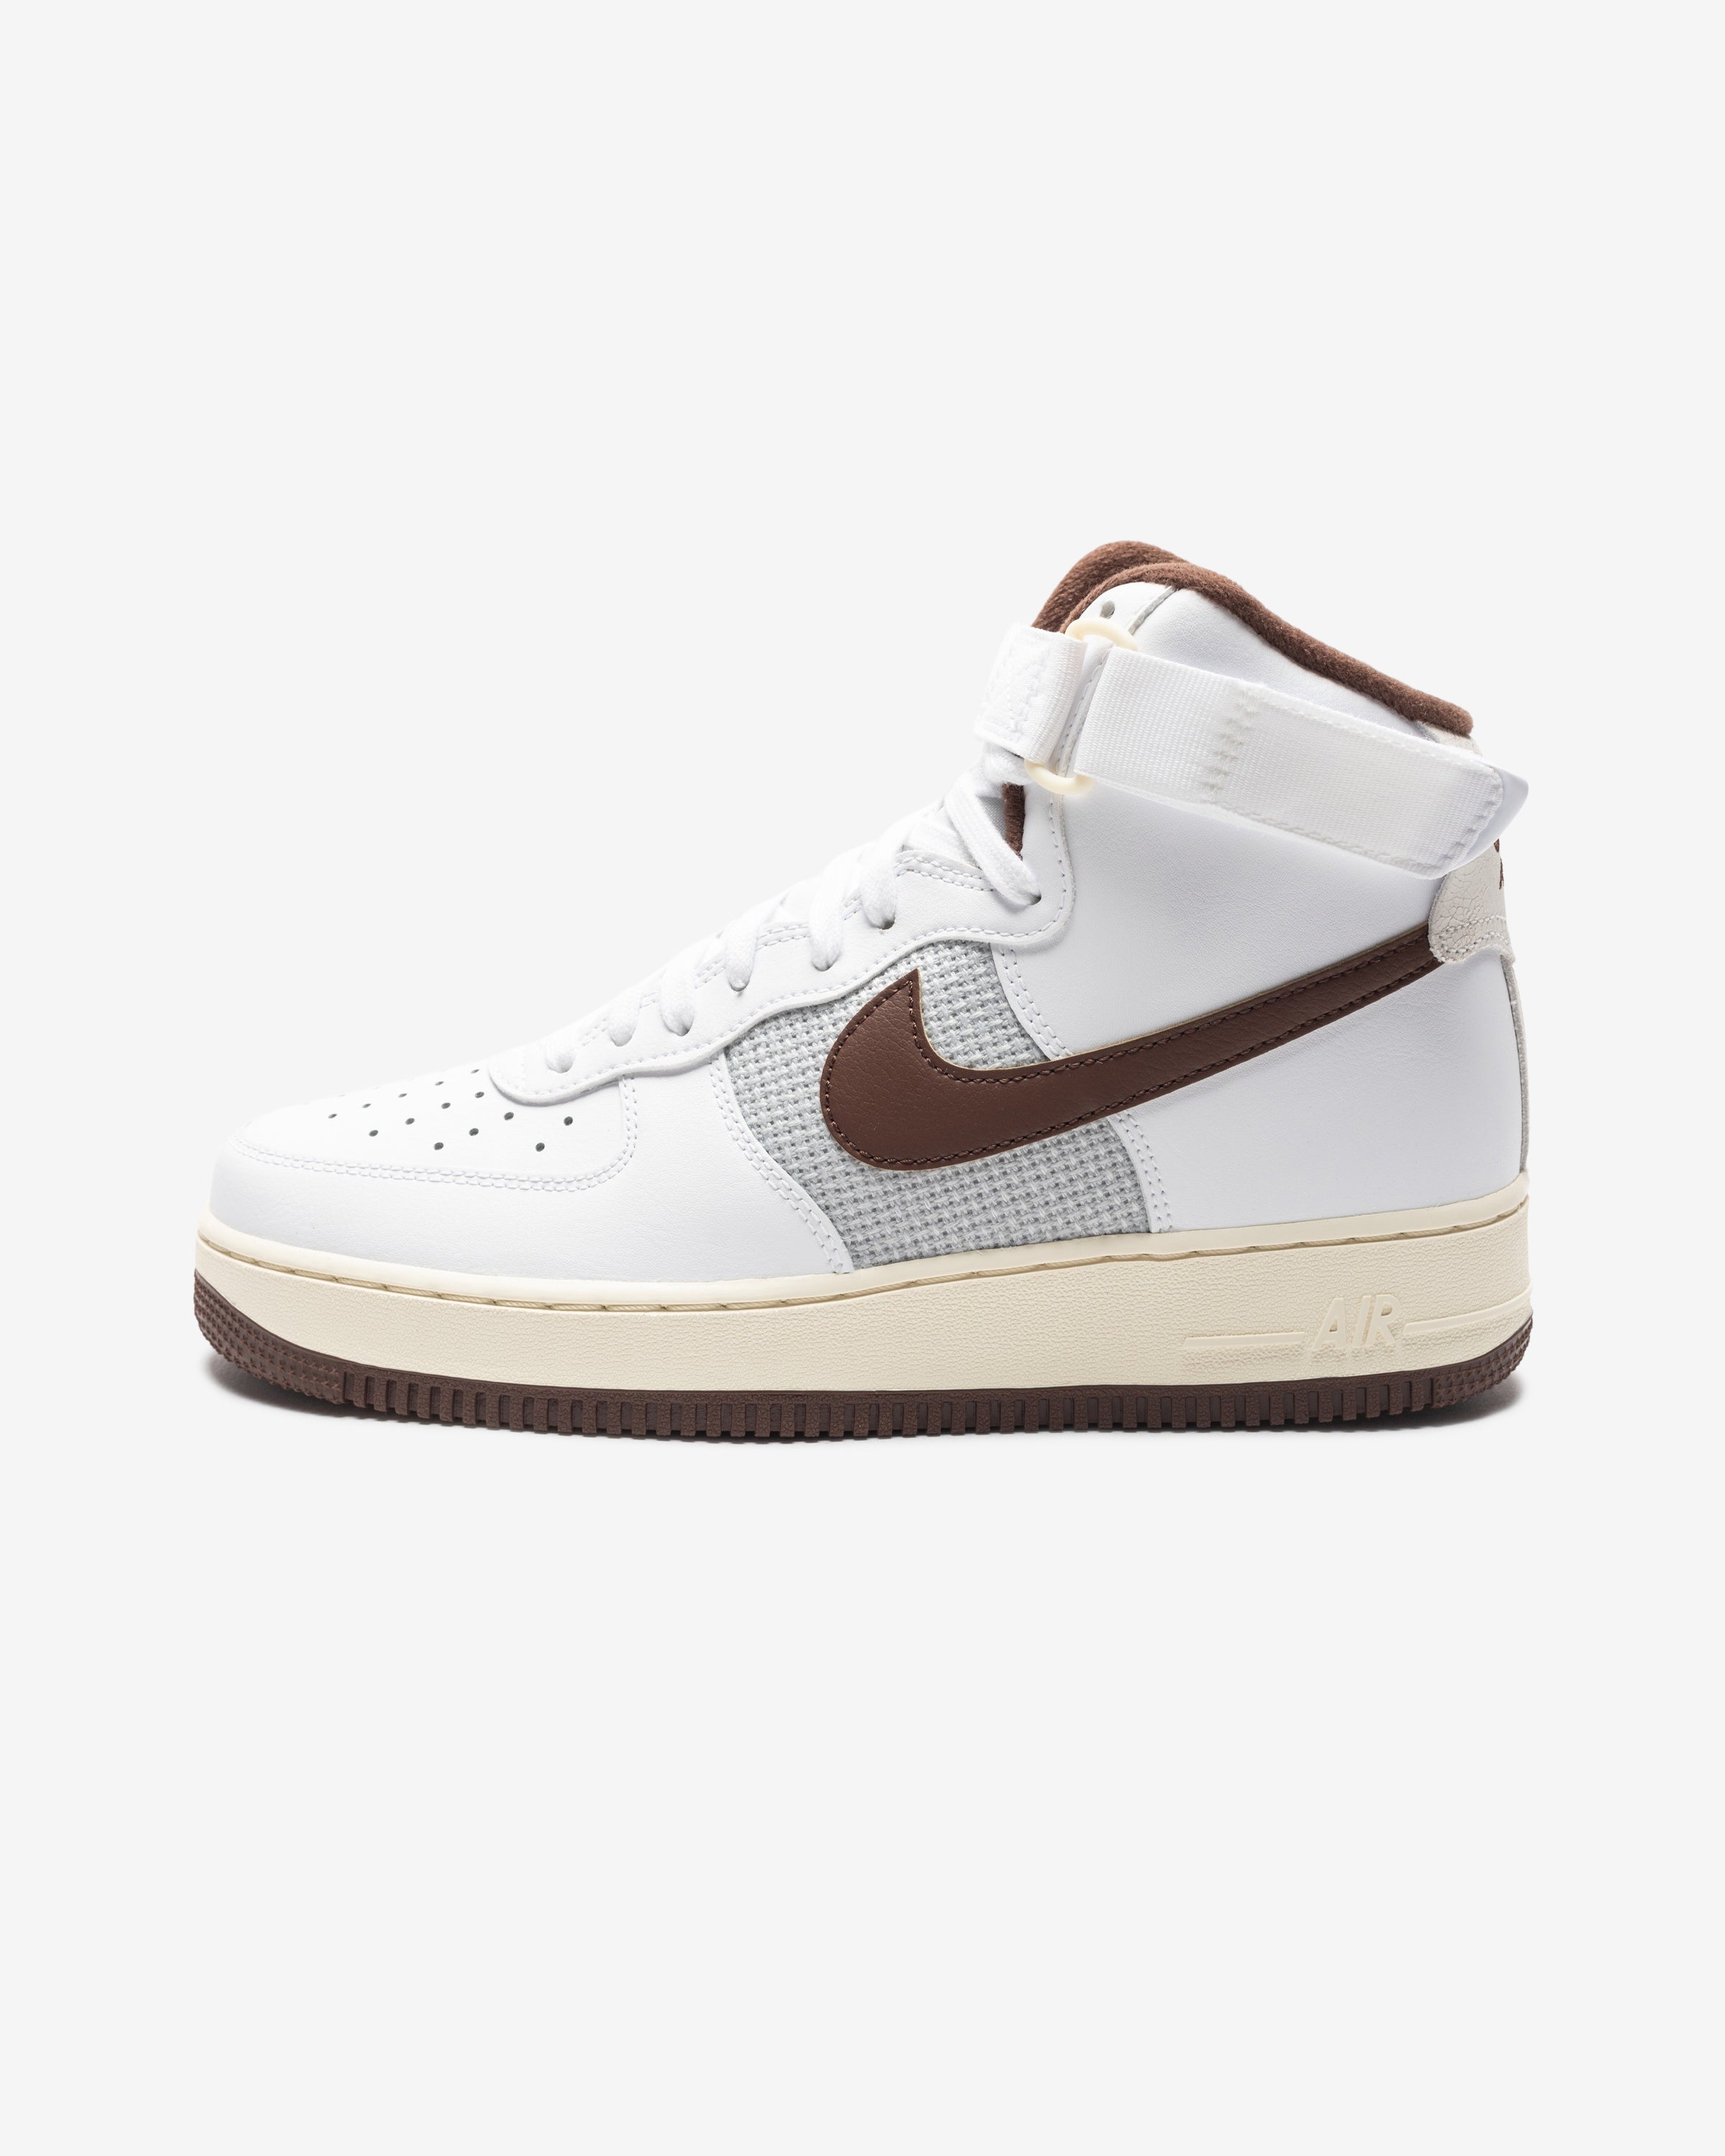 NIKE AIR FORCE 1 HIGH '07 LV8 VINTAGE - WHITE/ LTCHOCOLATE